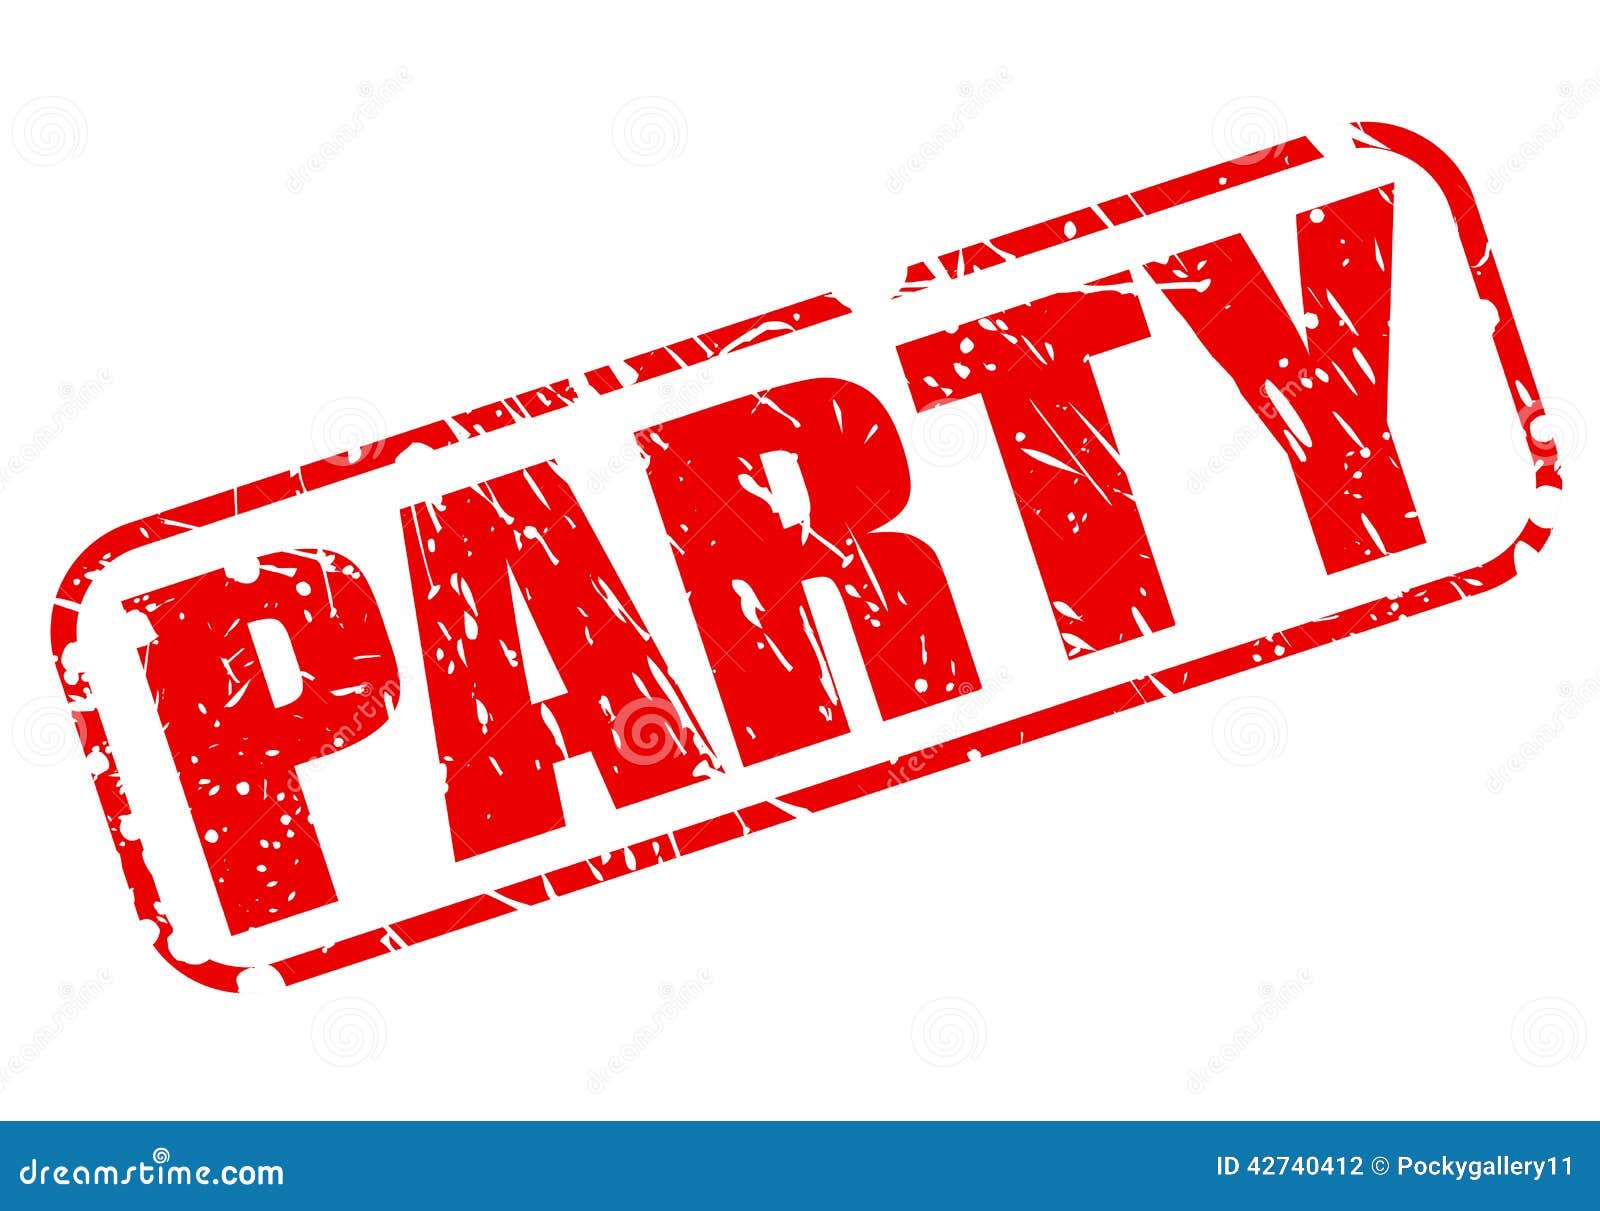 party-red-stamp-text-white-42740412.jpg